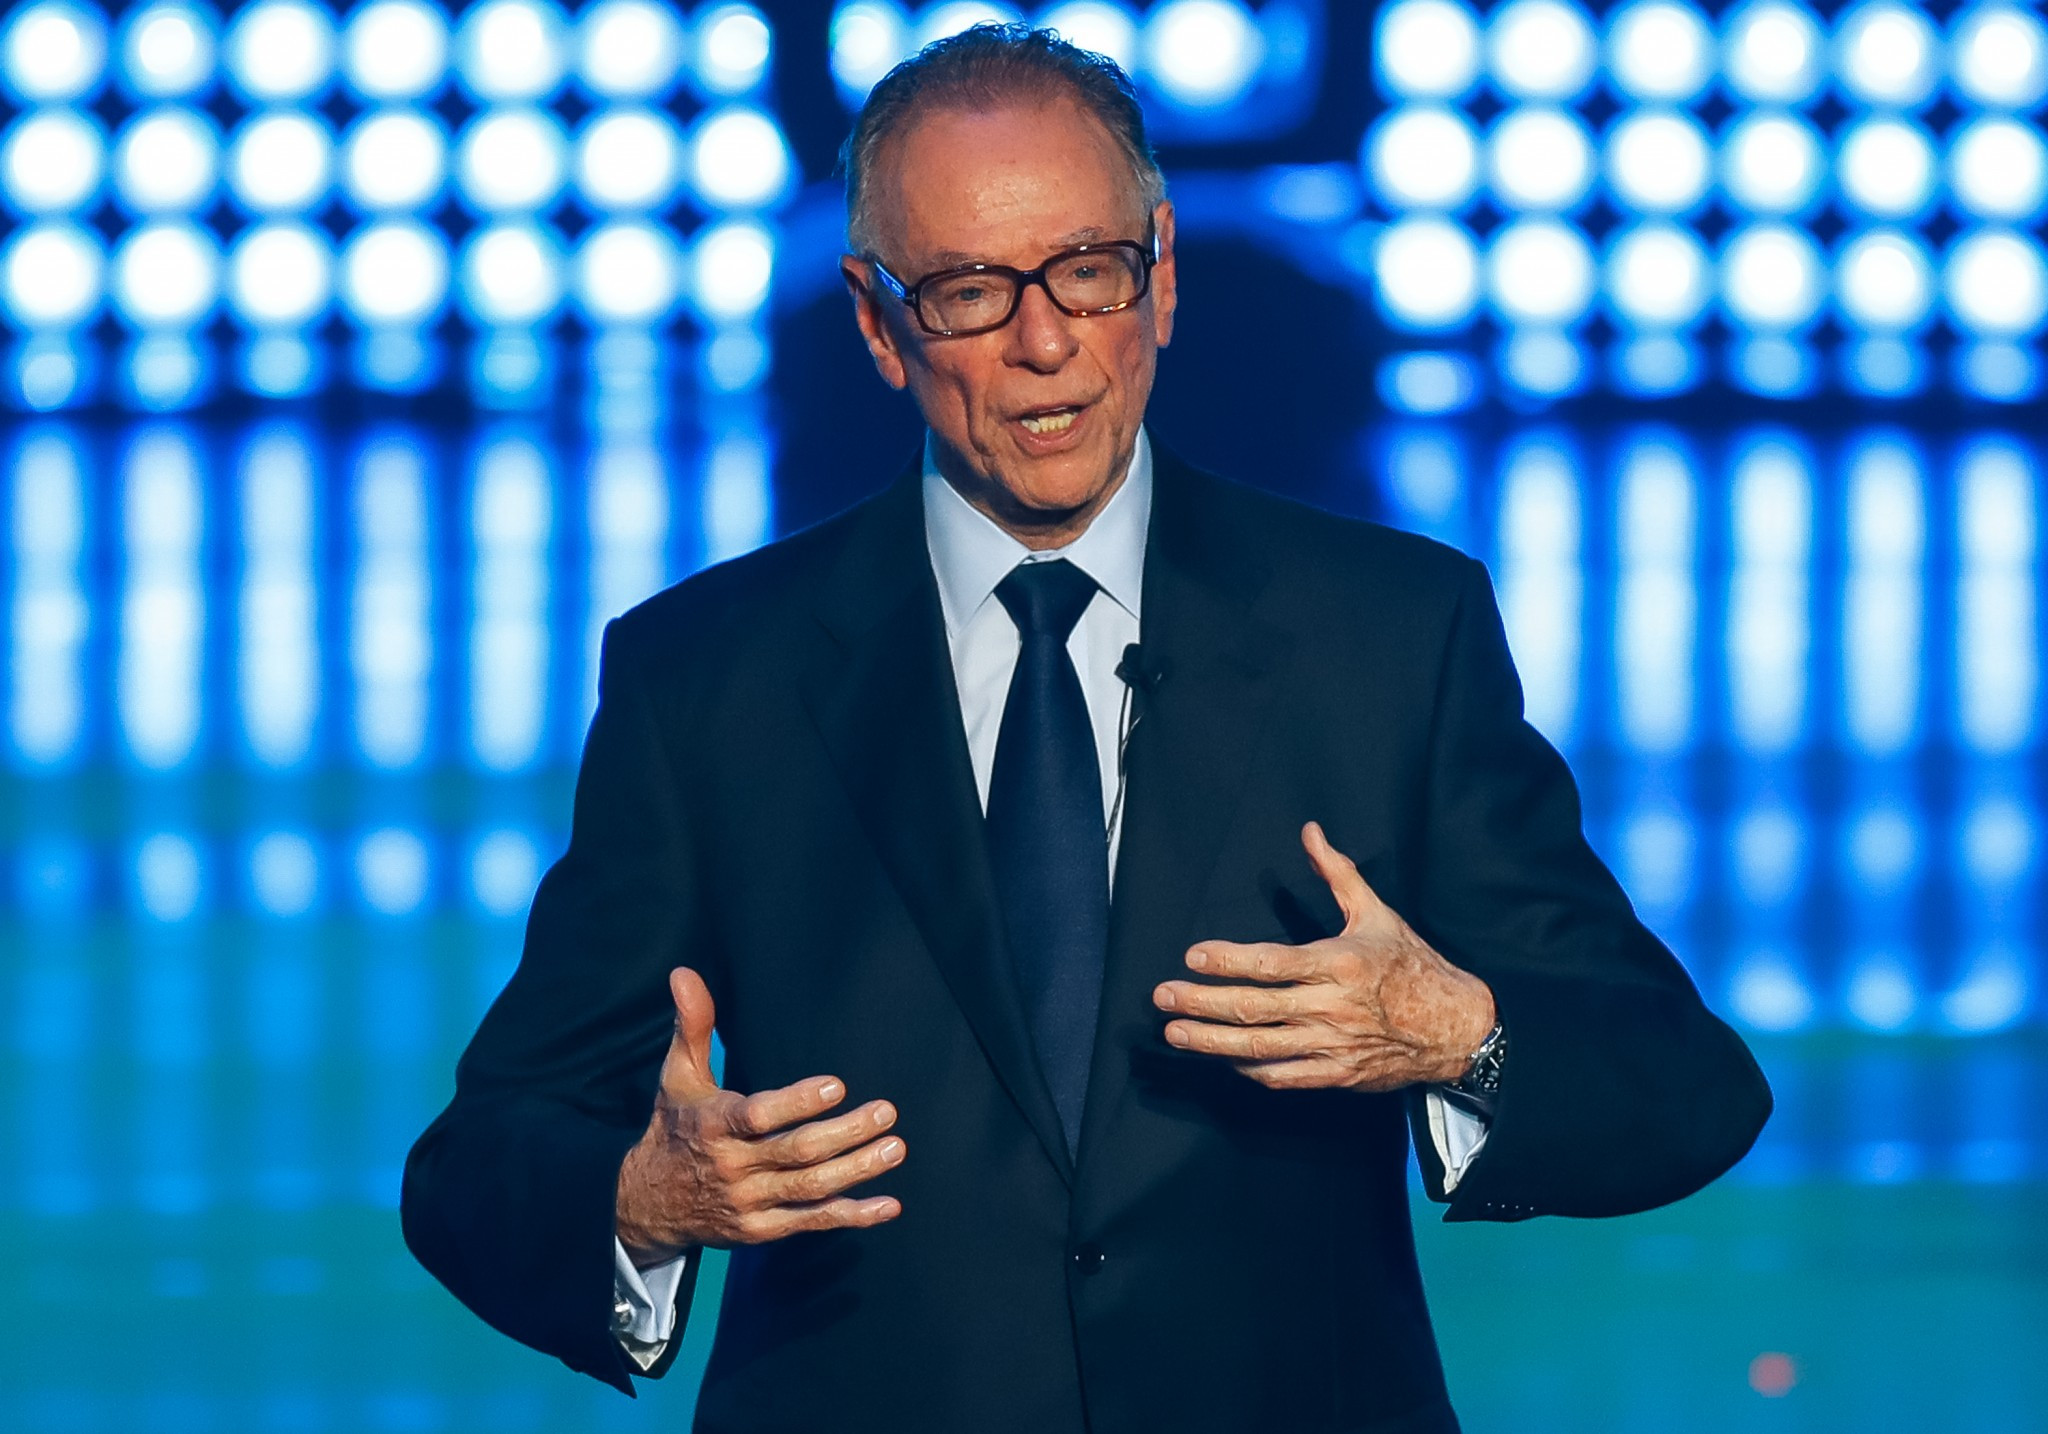 Carlos Nuzman is still President of COB and Rio 2016 ©Getty Images